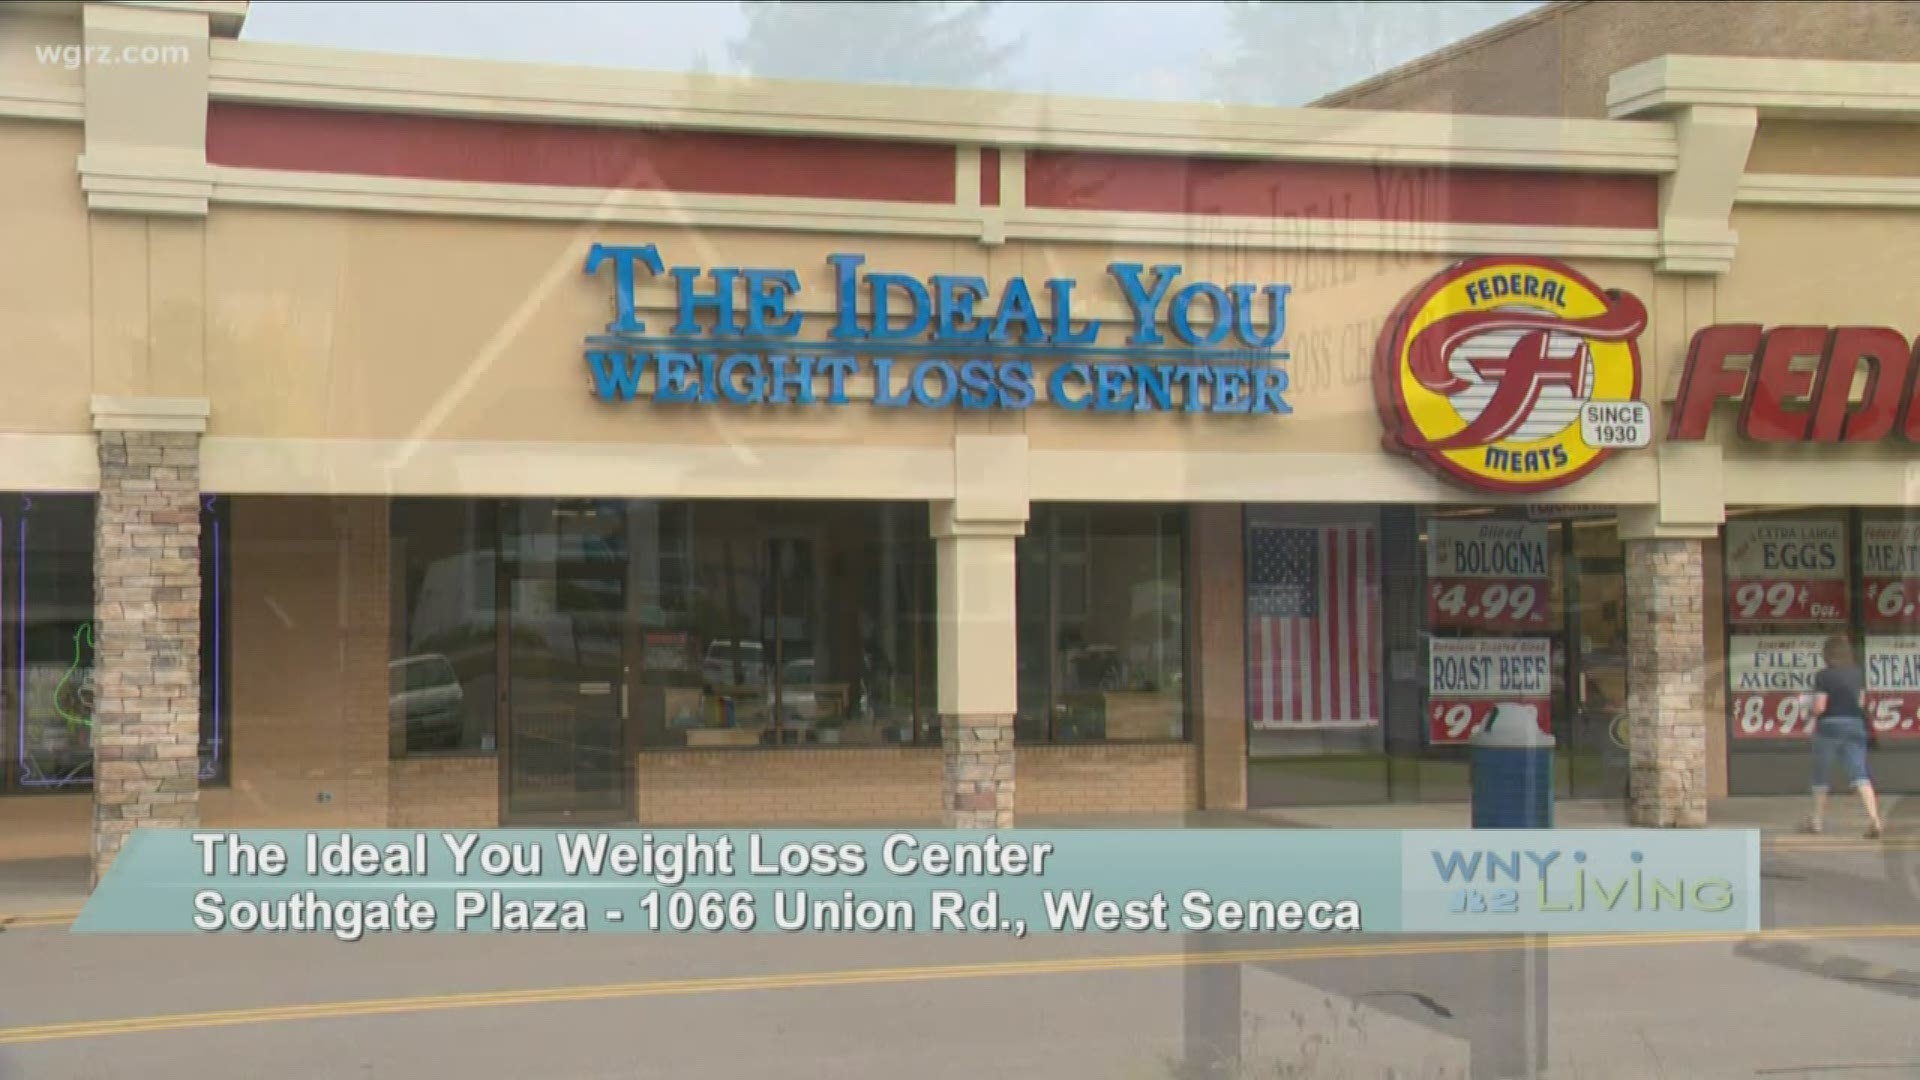 WNY Living - December 28 - The Ideal You Weight Loss Center (THIS VIDEO IS SPONSORED BY THE IDEAL YOU WEIGHT LOSS CENTER)